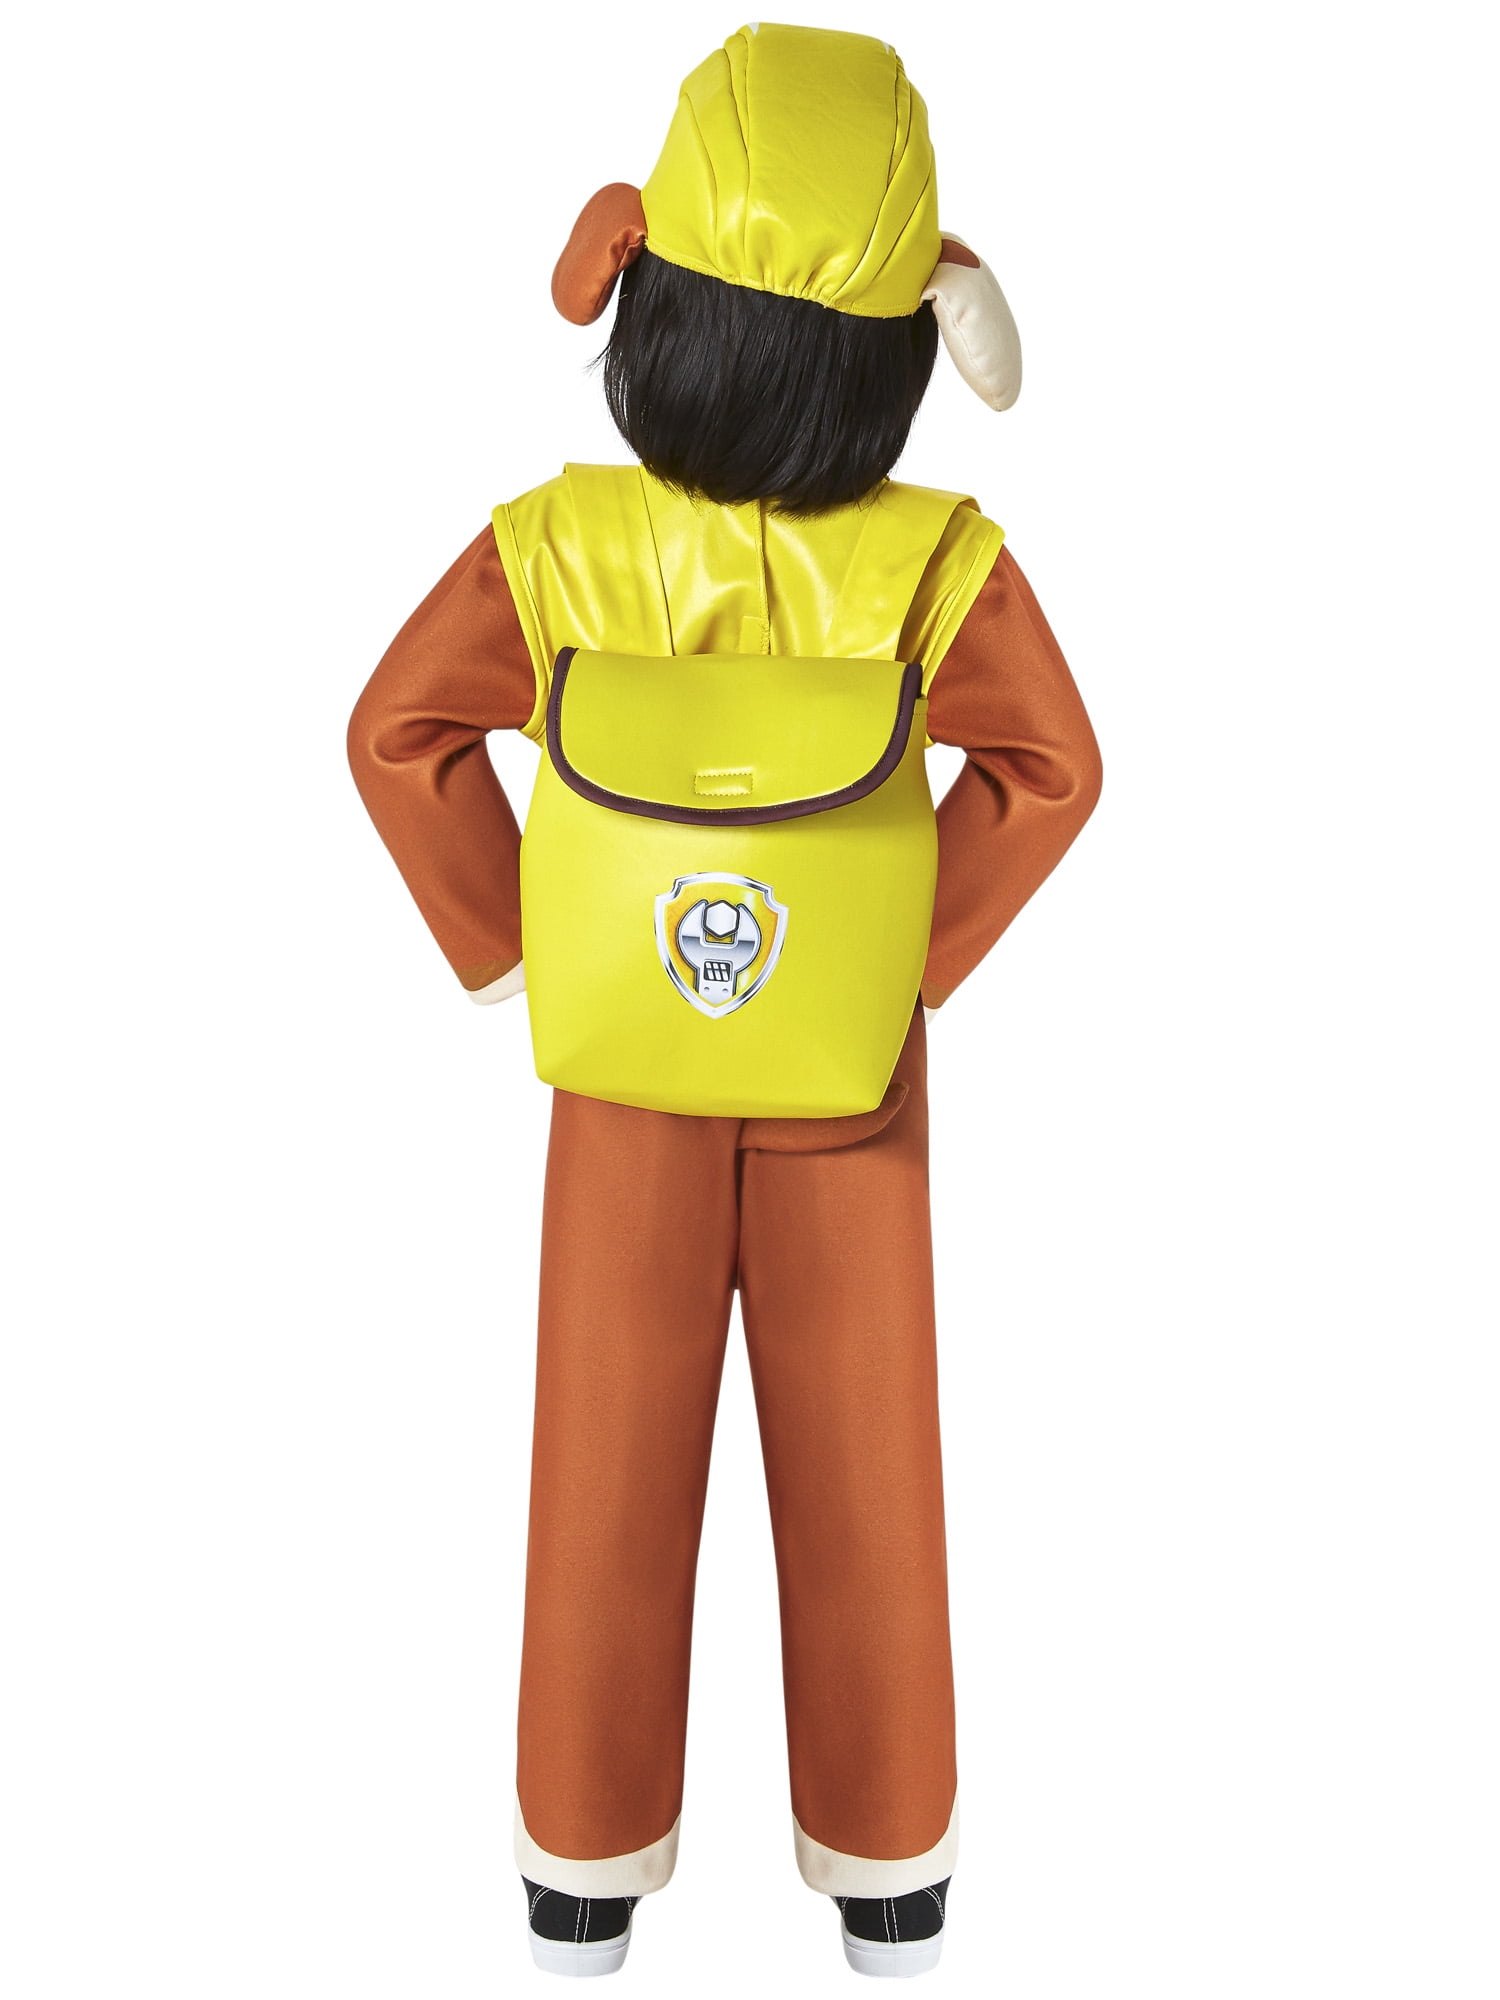 Rubie's Costume Co - Paw Patrol Rubble Toddler Costume - 4T